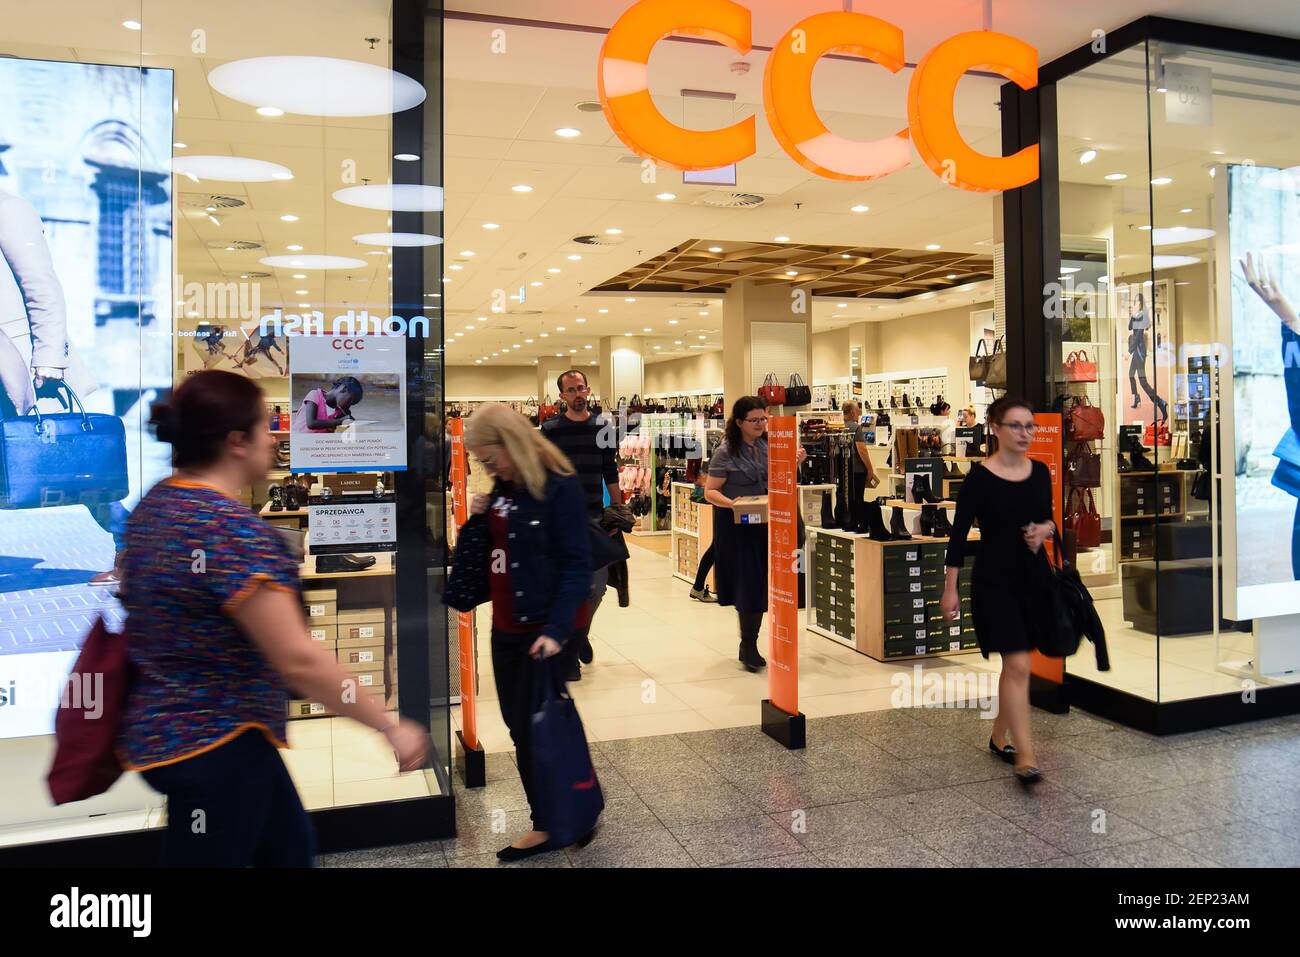 Polish clothing store chain CCC in Krakow Stock Photo - Alamy